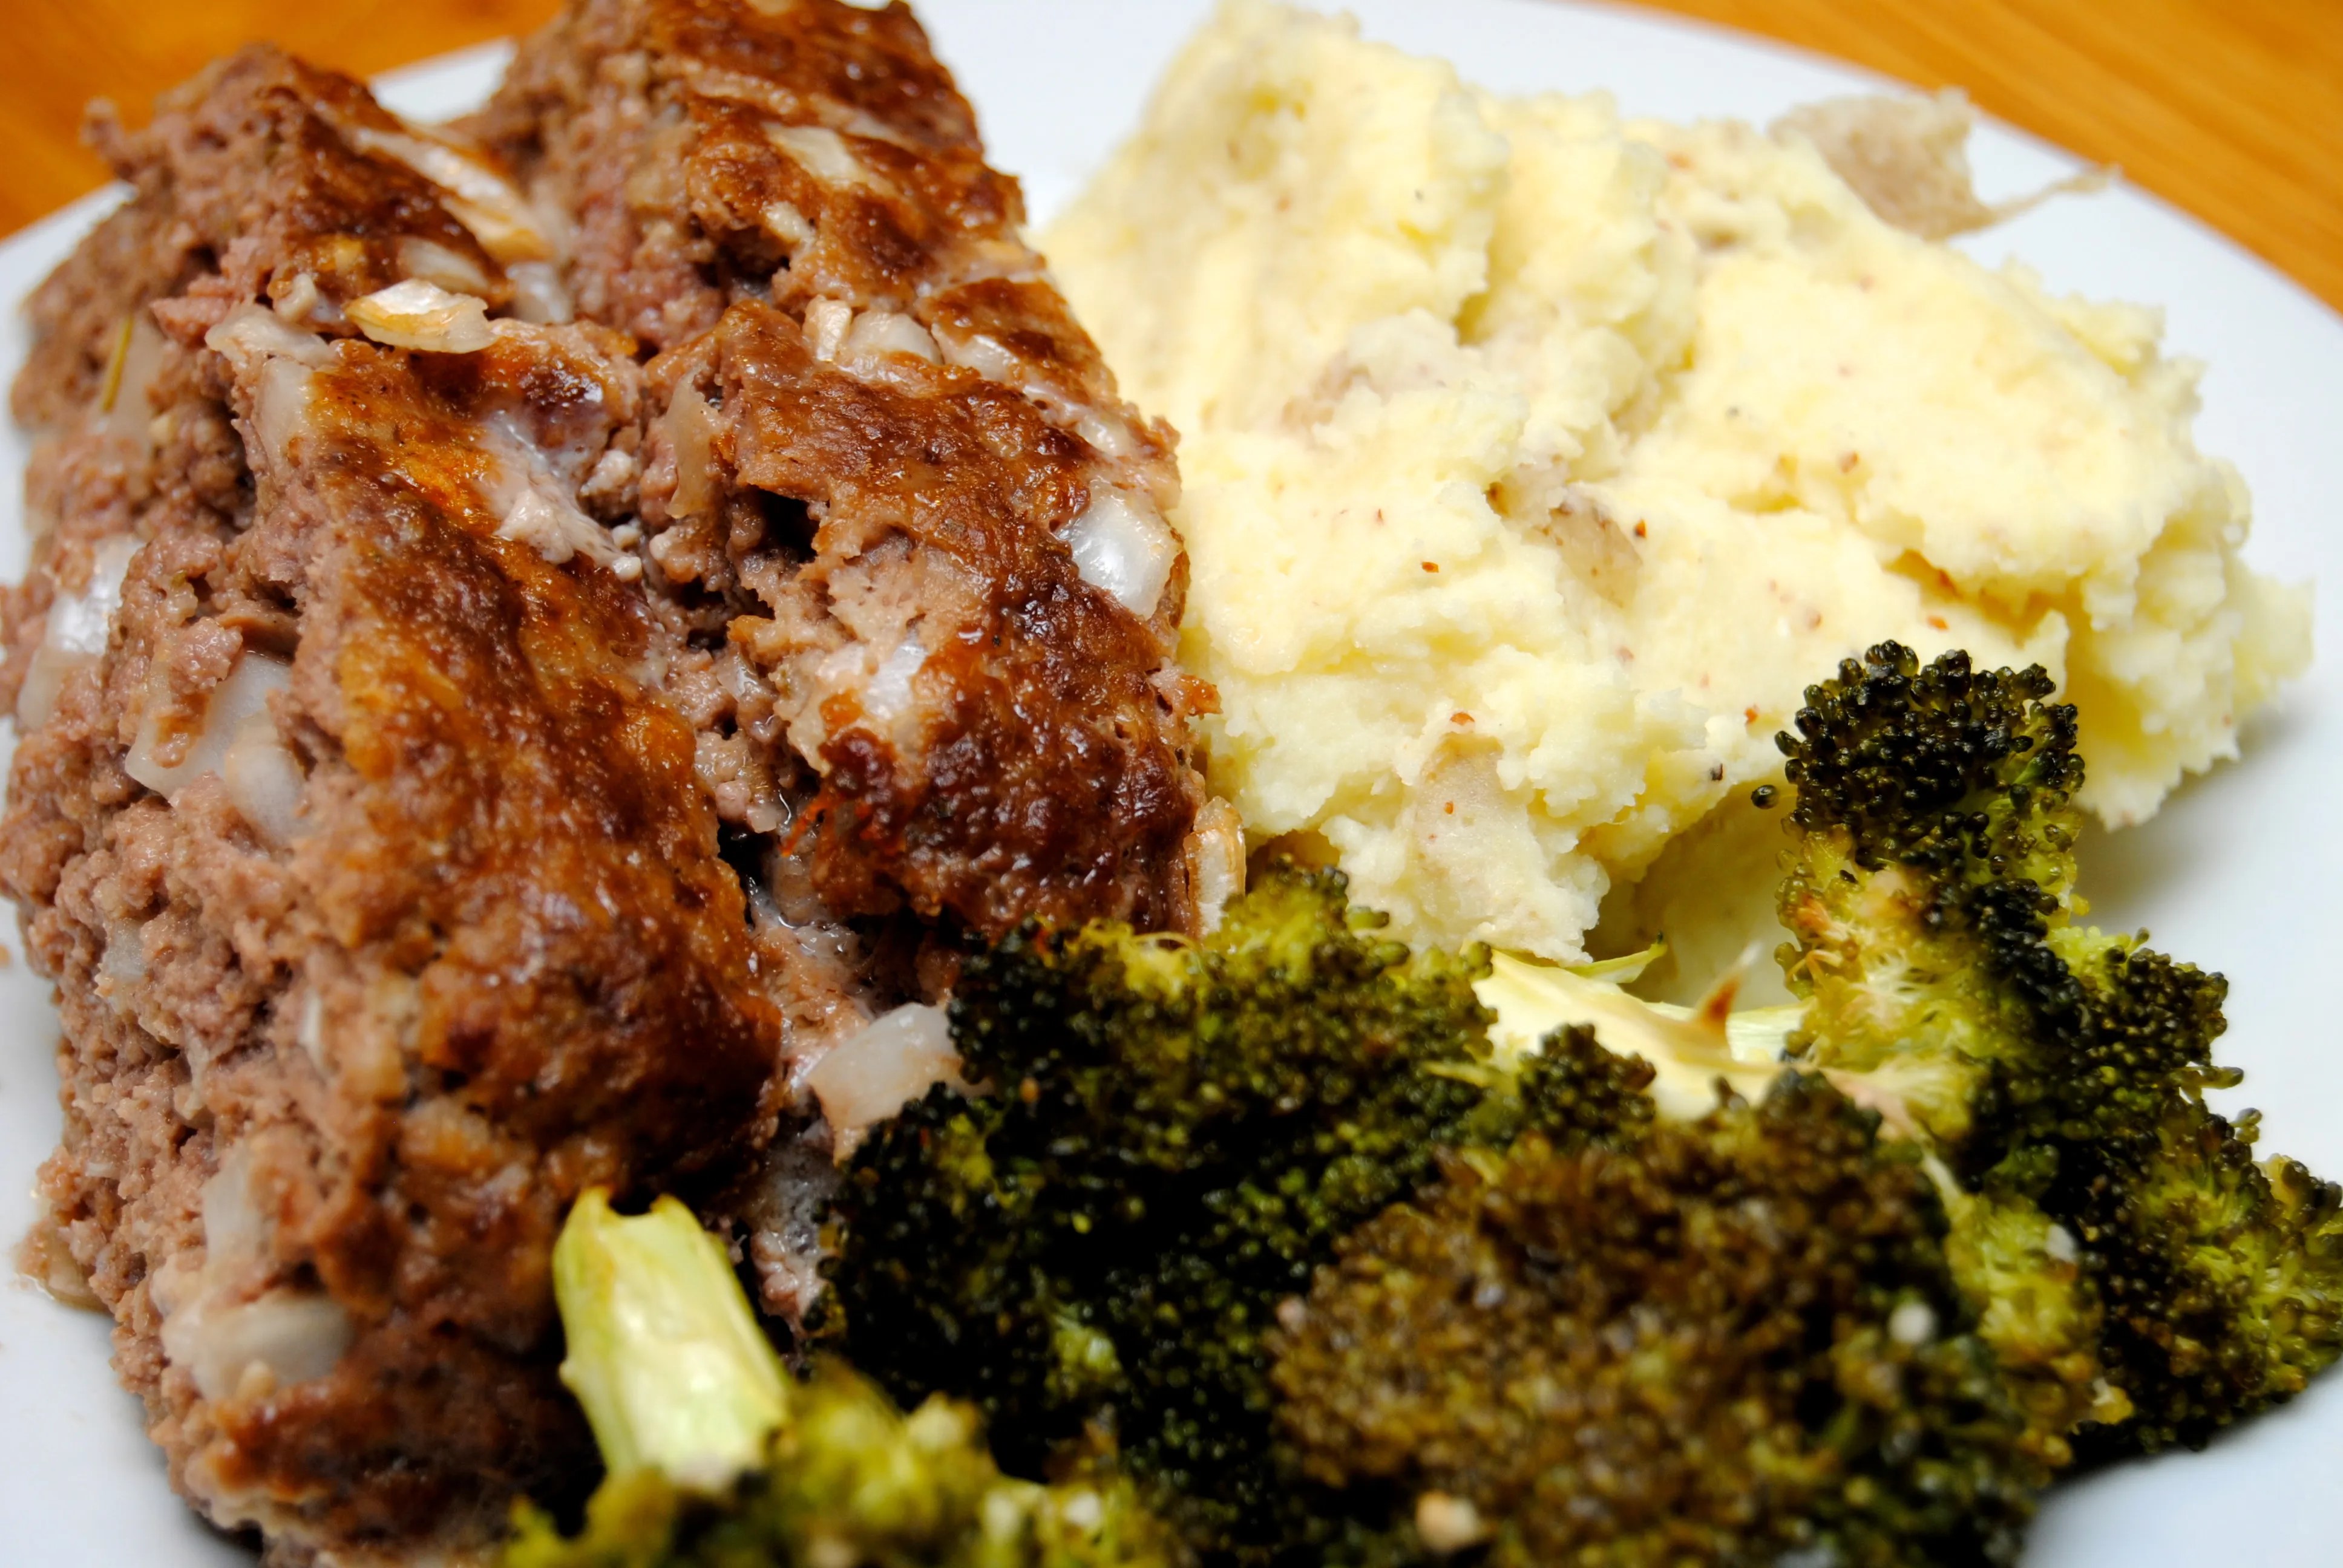 Meatloaf, Mashed Potatoes and Broccoli